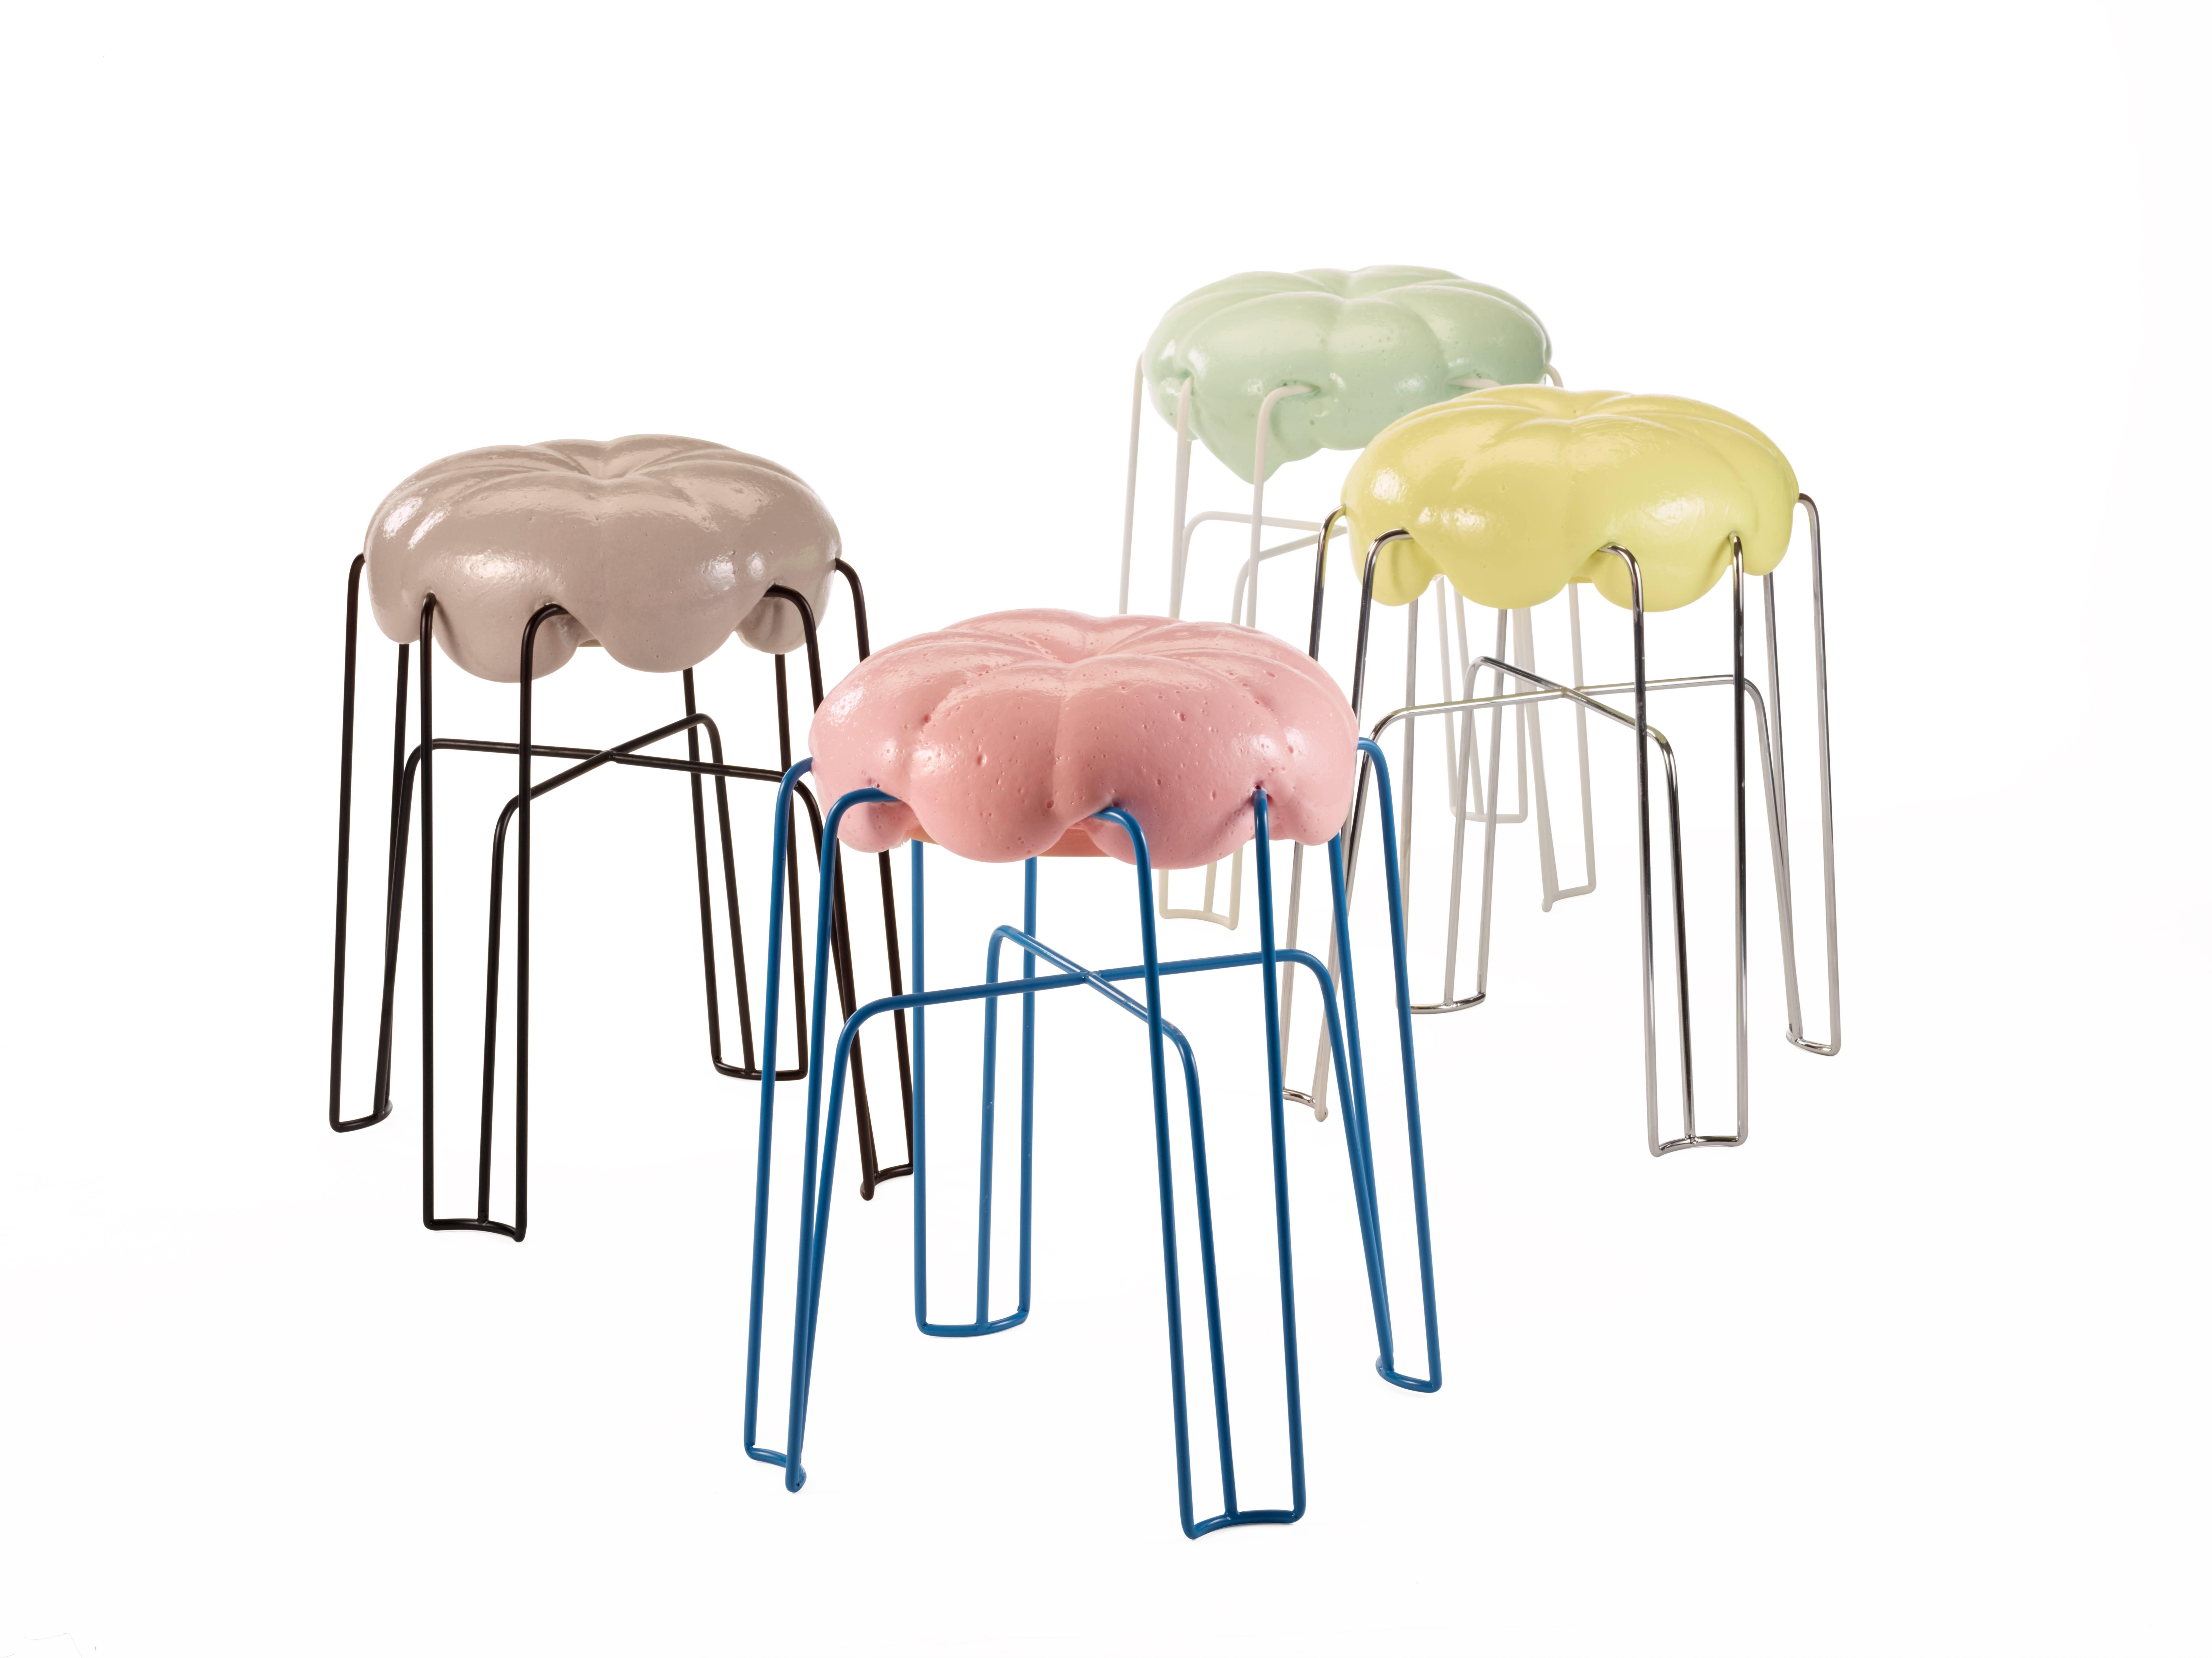 German Marshmallow Stool by Paul Ketz in Tennislove Polyurethane Foam and Steel For Sale